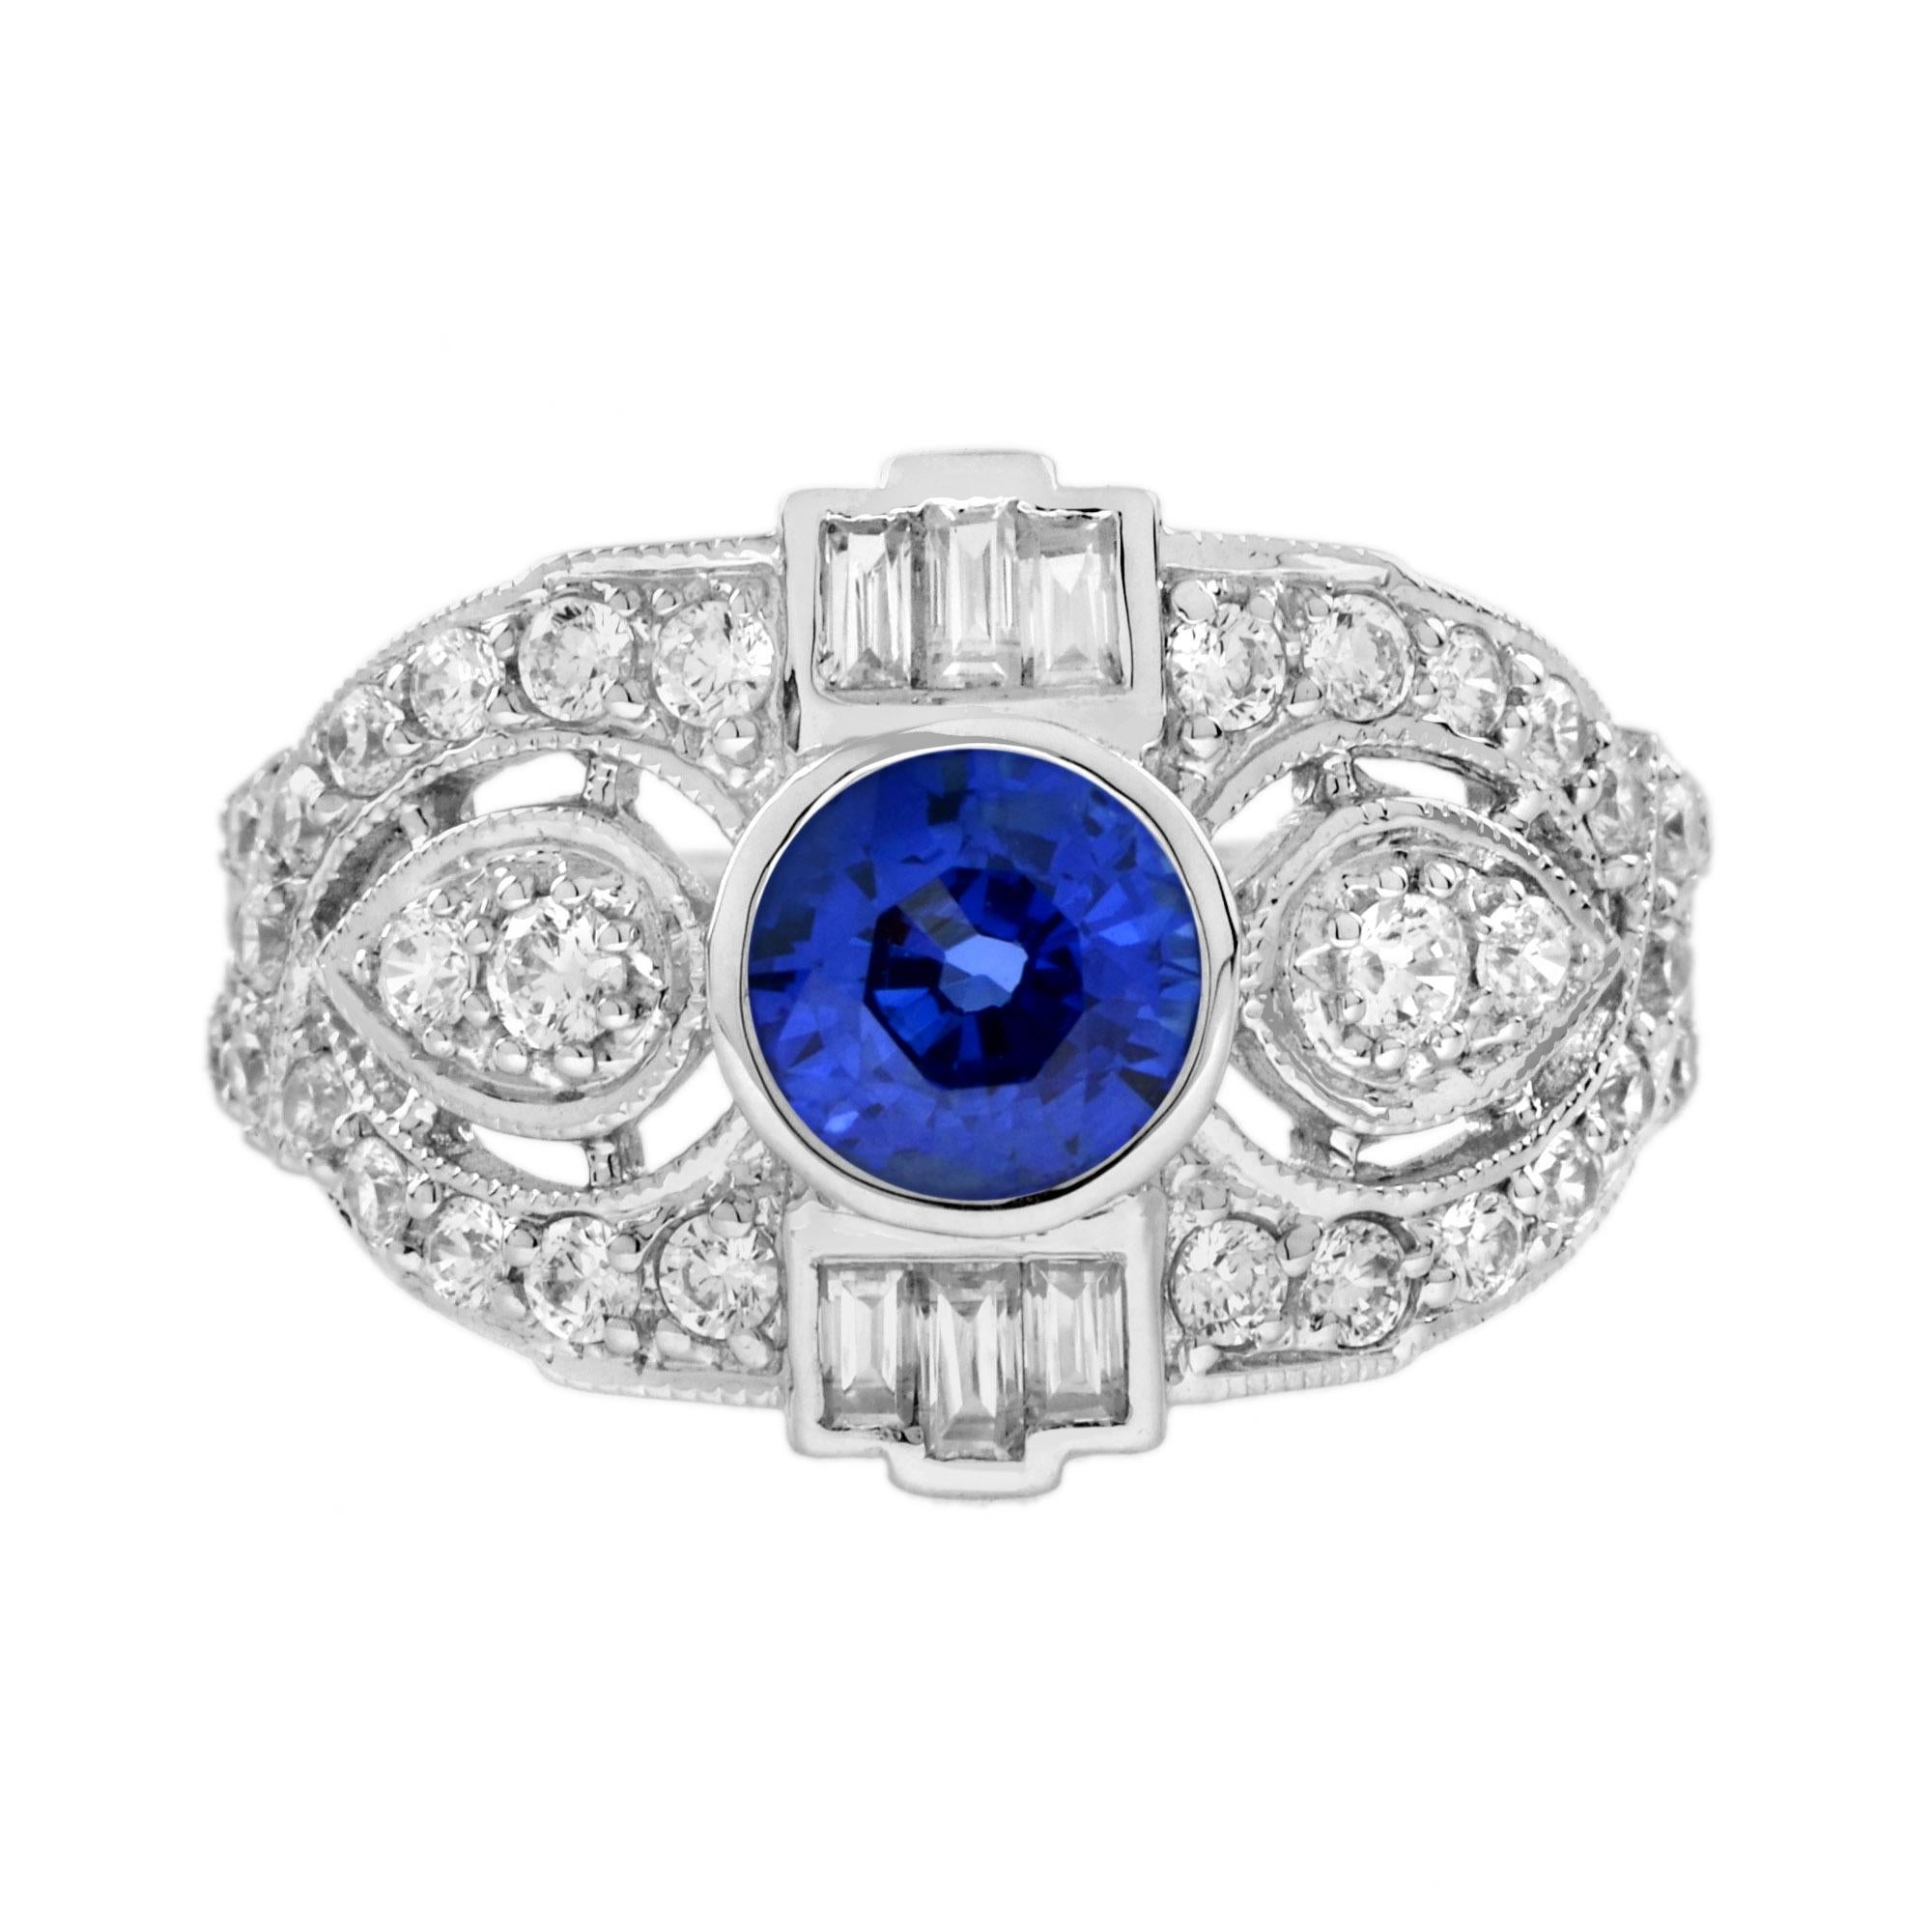 Ceylon Sapphire and Diamond Art Deco Style Engagement Ring in 18K White Gold